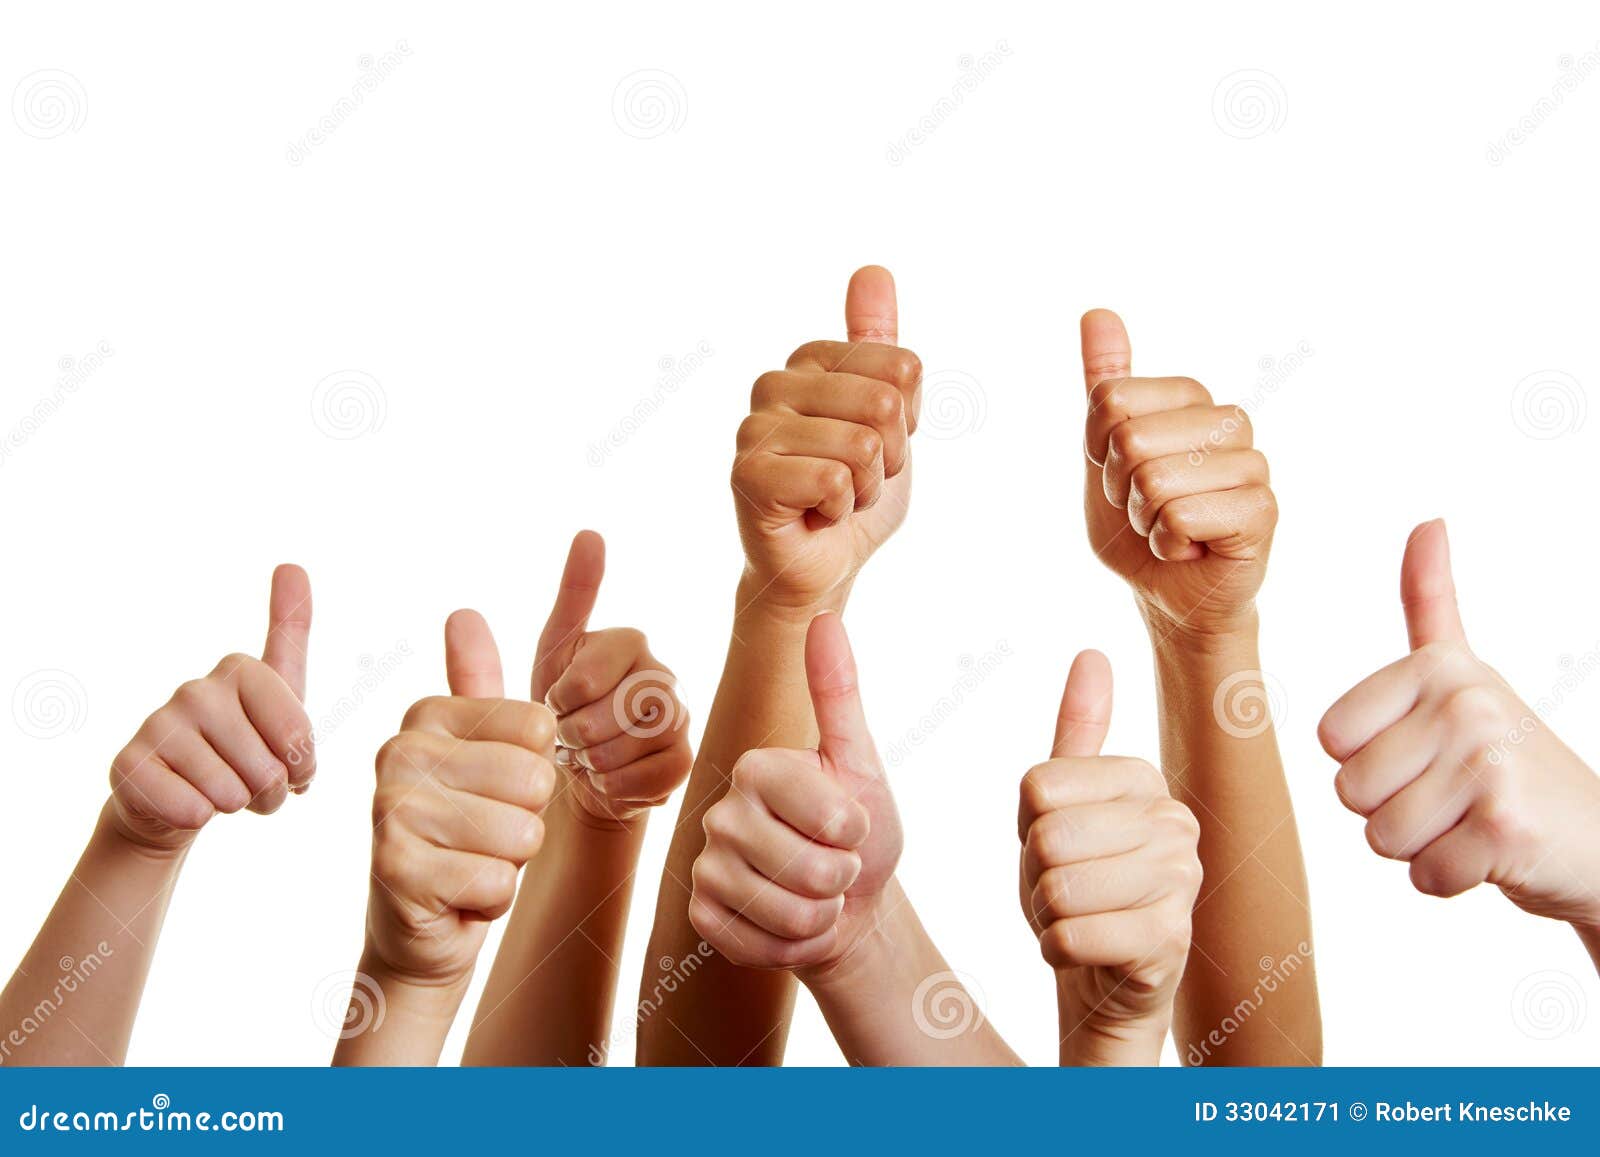 group-people-holding-thumbs-up-holds-many-congratulates-winner-33042171.jpg